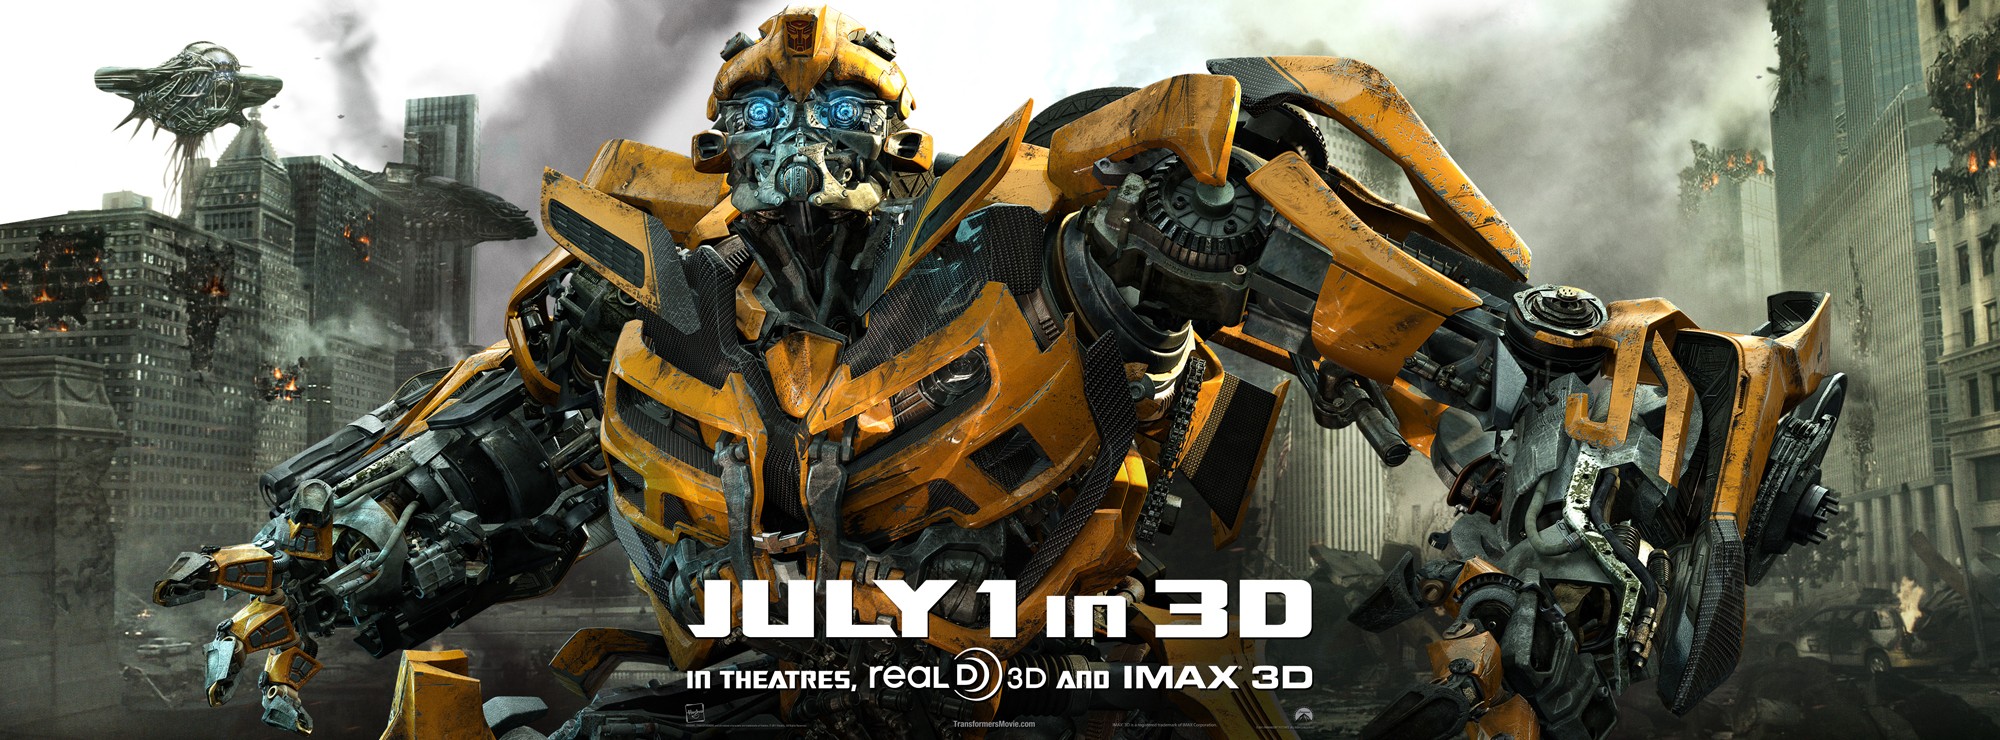 Mega Sized Movie Poster Image for Transformers: Dark of the Moon (#4 of 9)